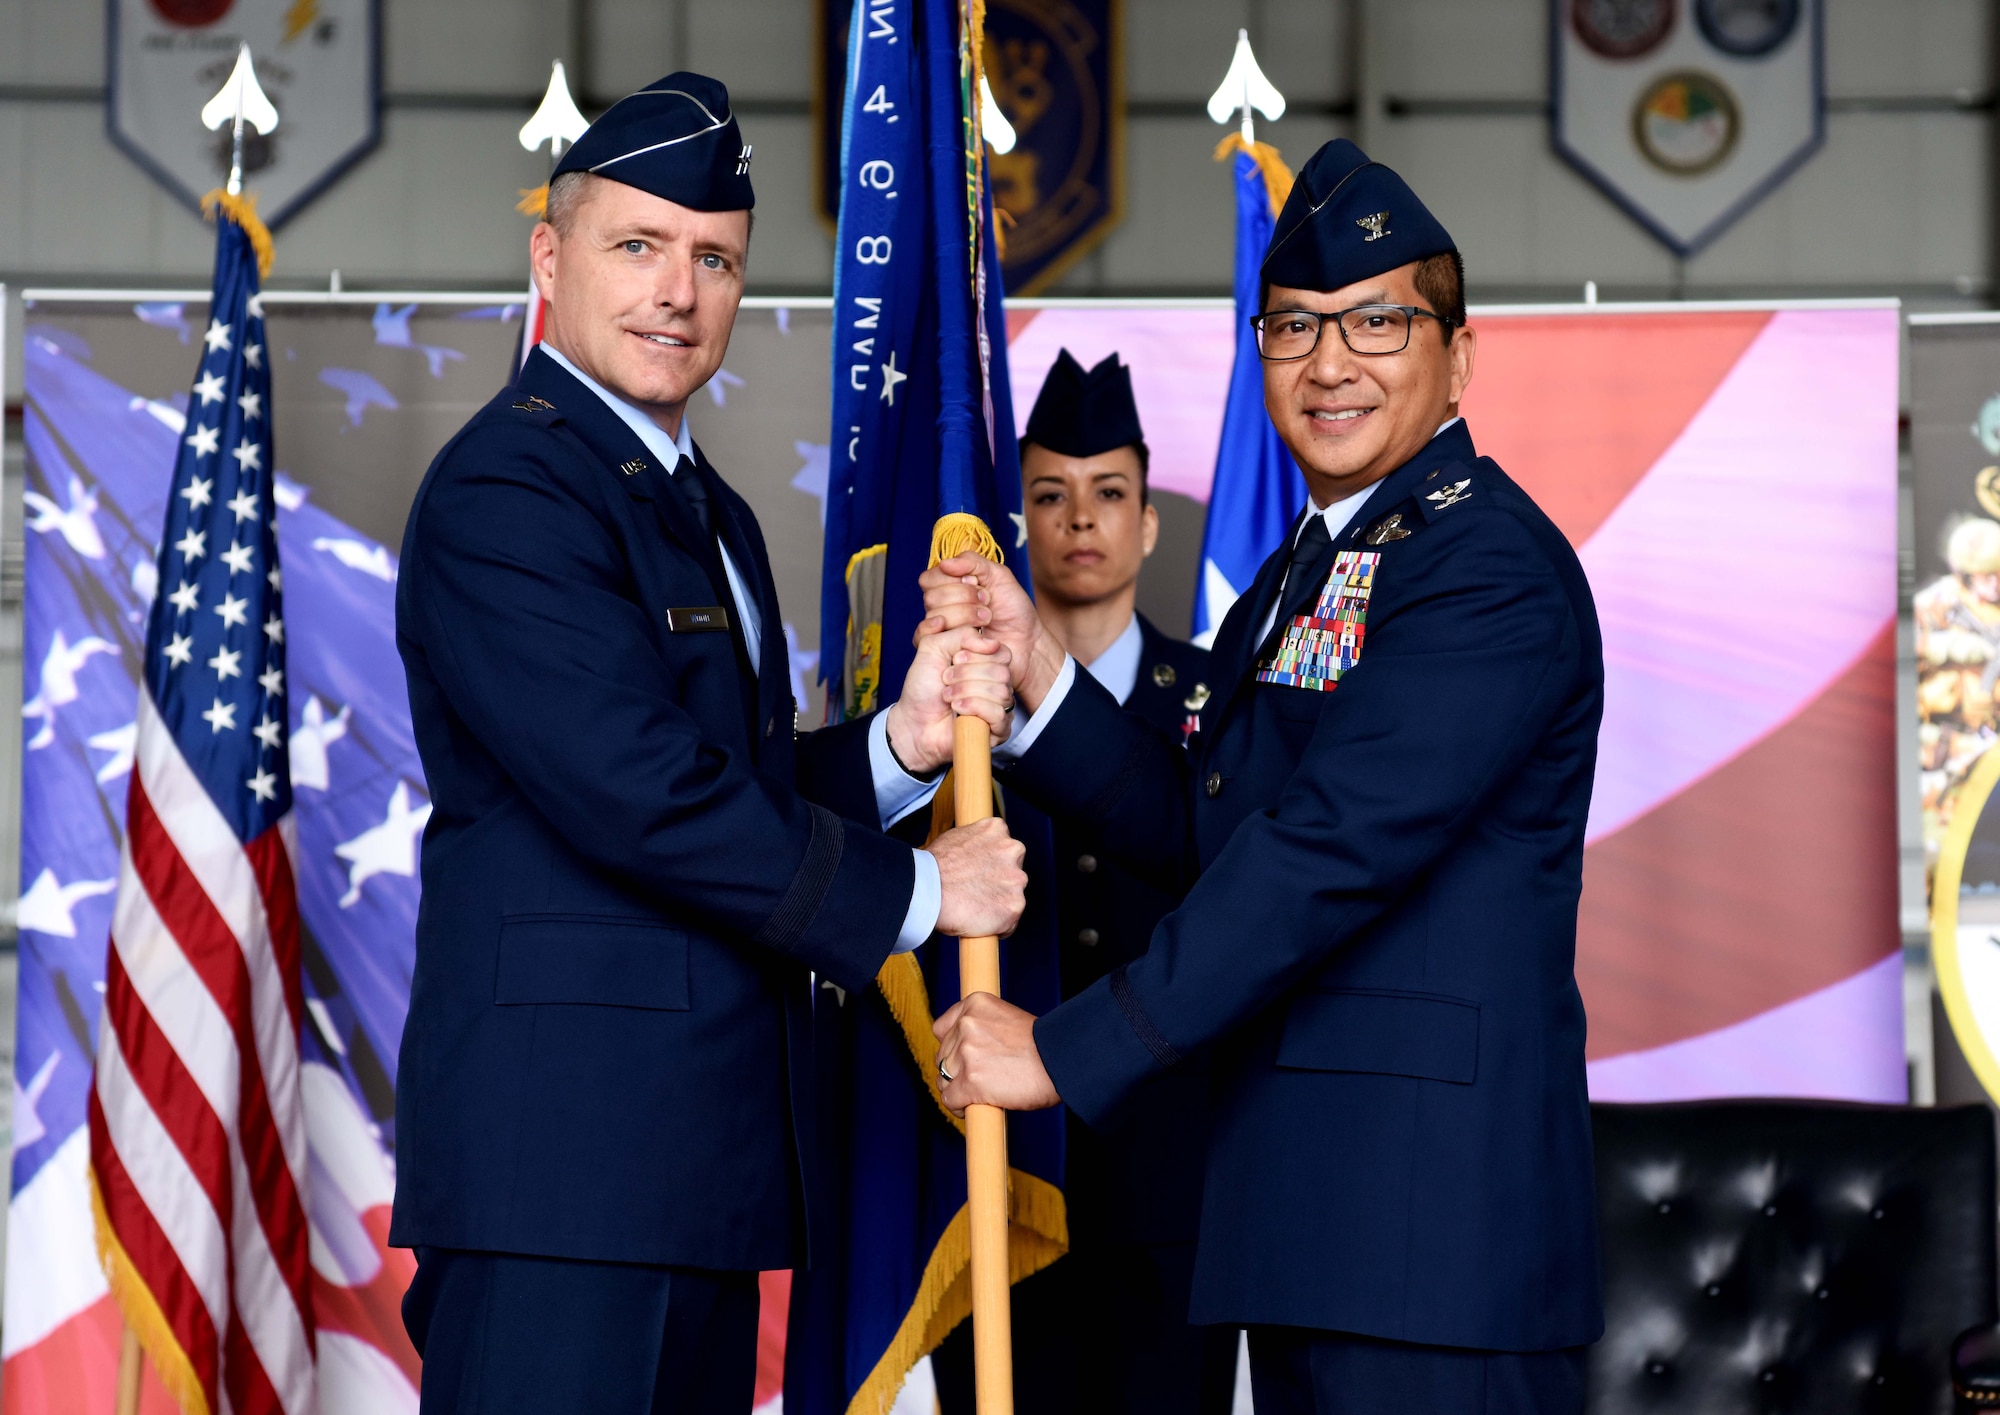 U.S. Col. Troy Pananon (right), 100th Air Refueling Wing incoming commander, assumes command from Maj. Gen. John Wood, Third Air Force commander, during a change of command ceremony at RAF Mildenhall, England, May 31, 2019. Pananon previously served as the 6th Air Mobility Wing vice commander at MacDill Air Force Base, Florida. (U.S. Air Force photo by Airman 1st Class Brandon Esau)